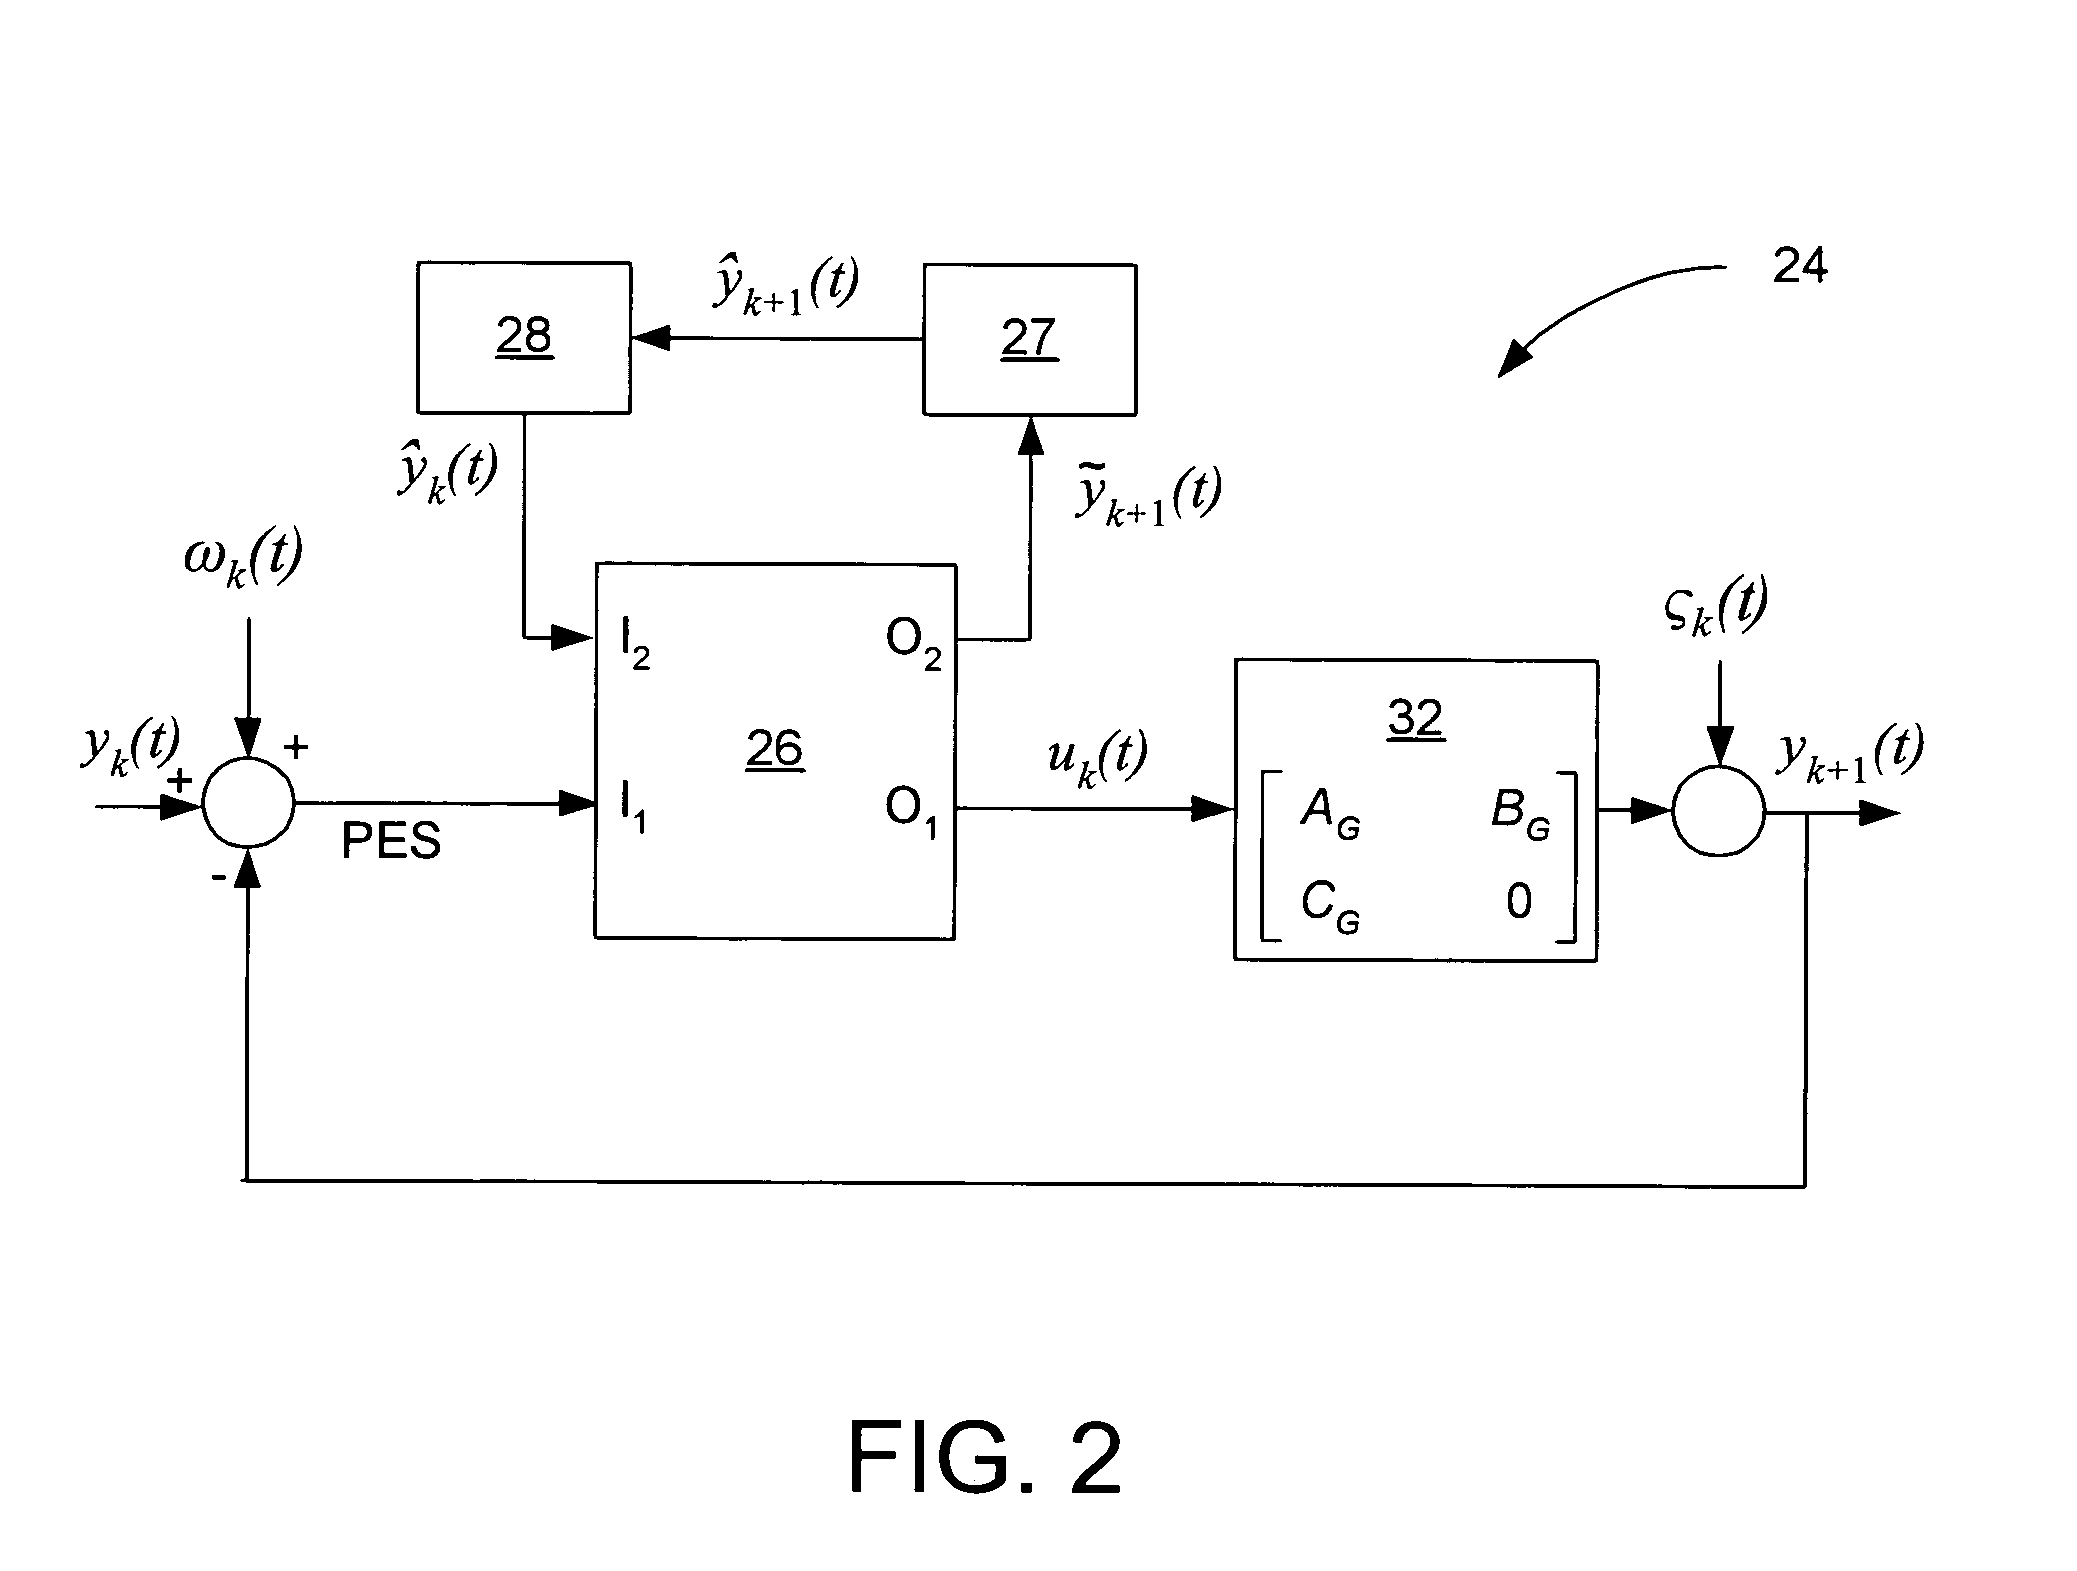 Method and apparatus for self servowriting of tracks of a disk drive using a servo control loop having a two-dimensional weighted digital state compensator